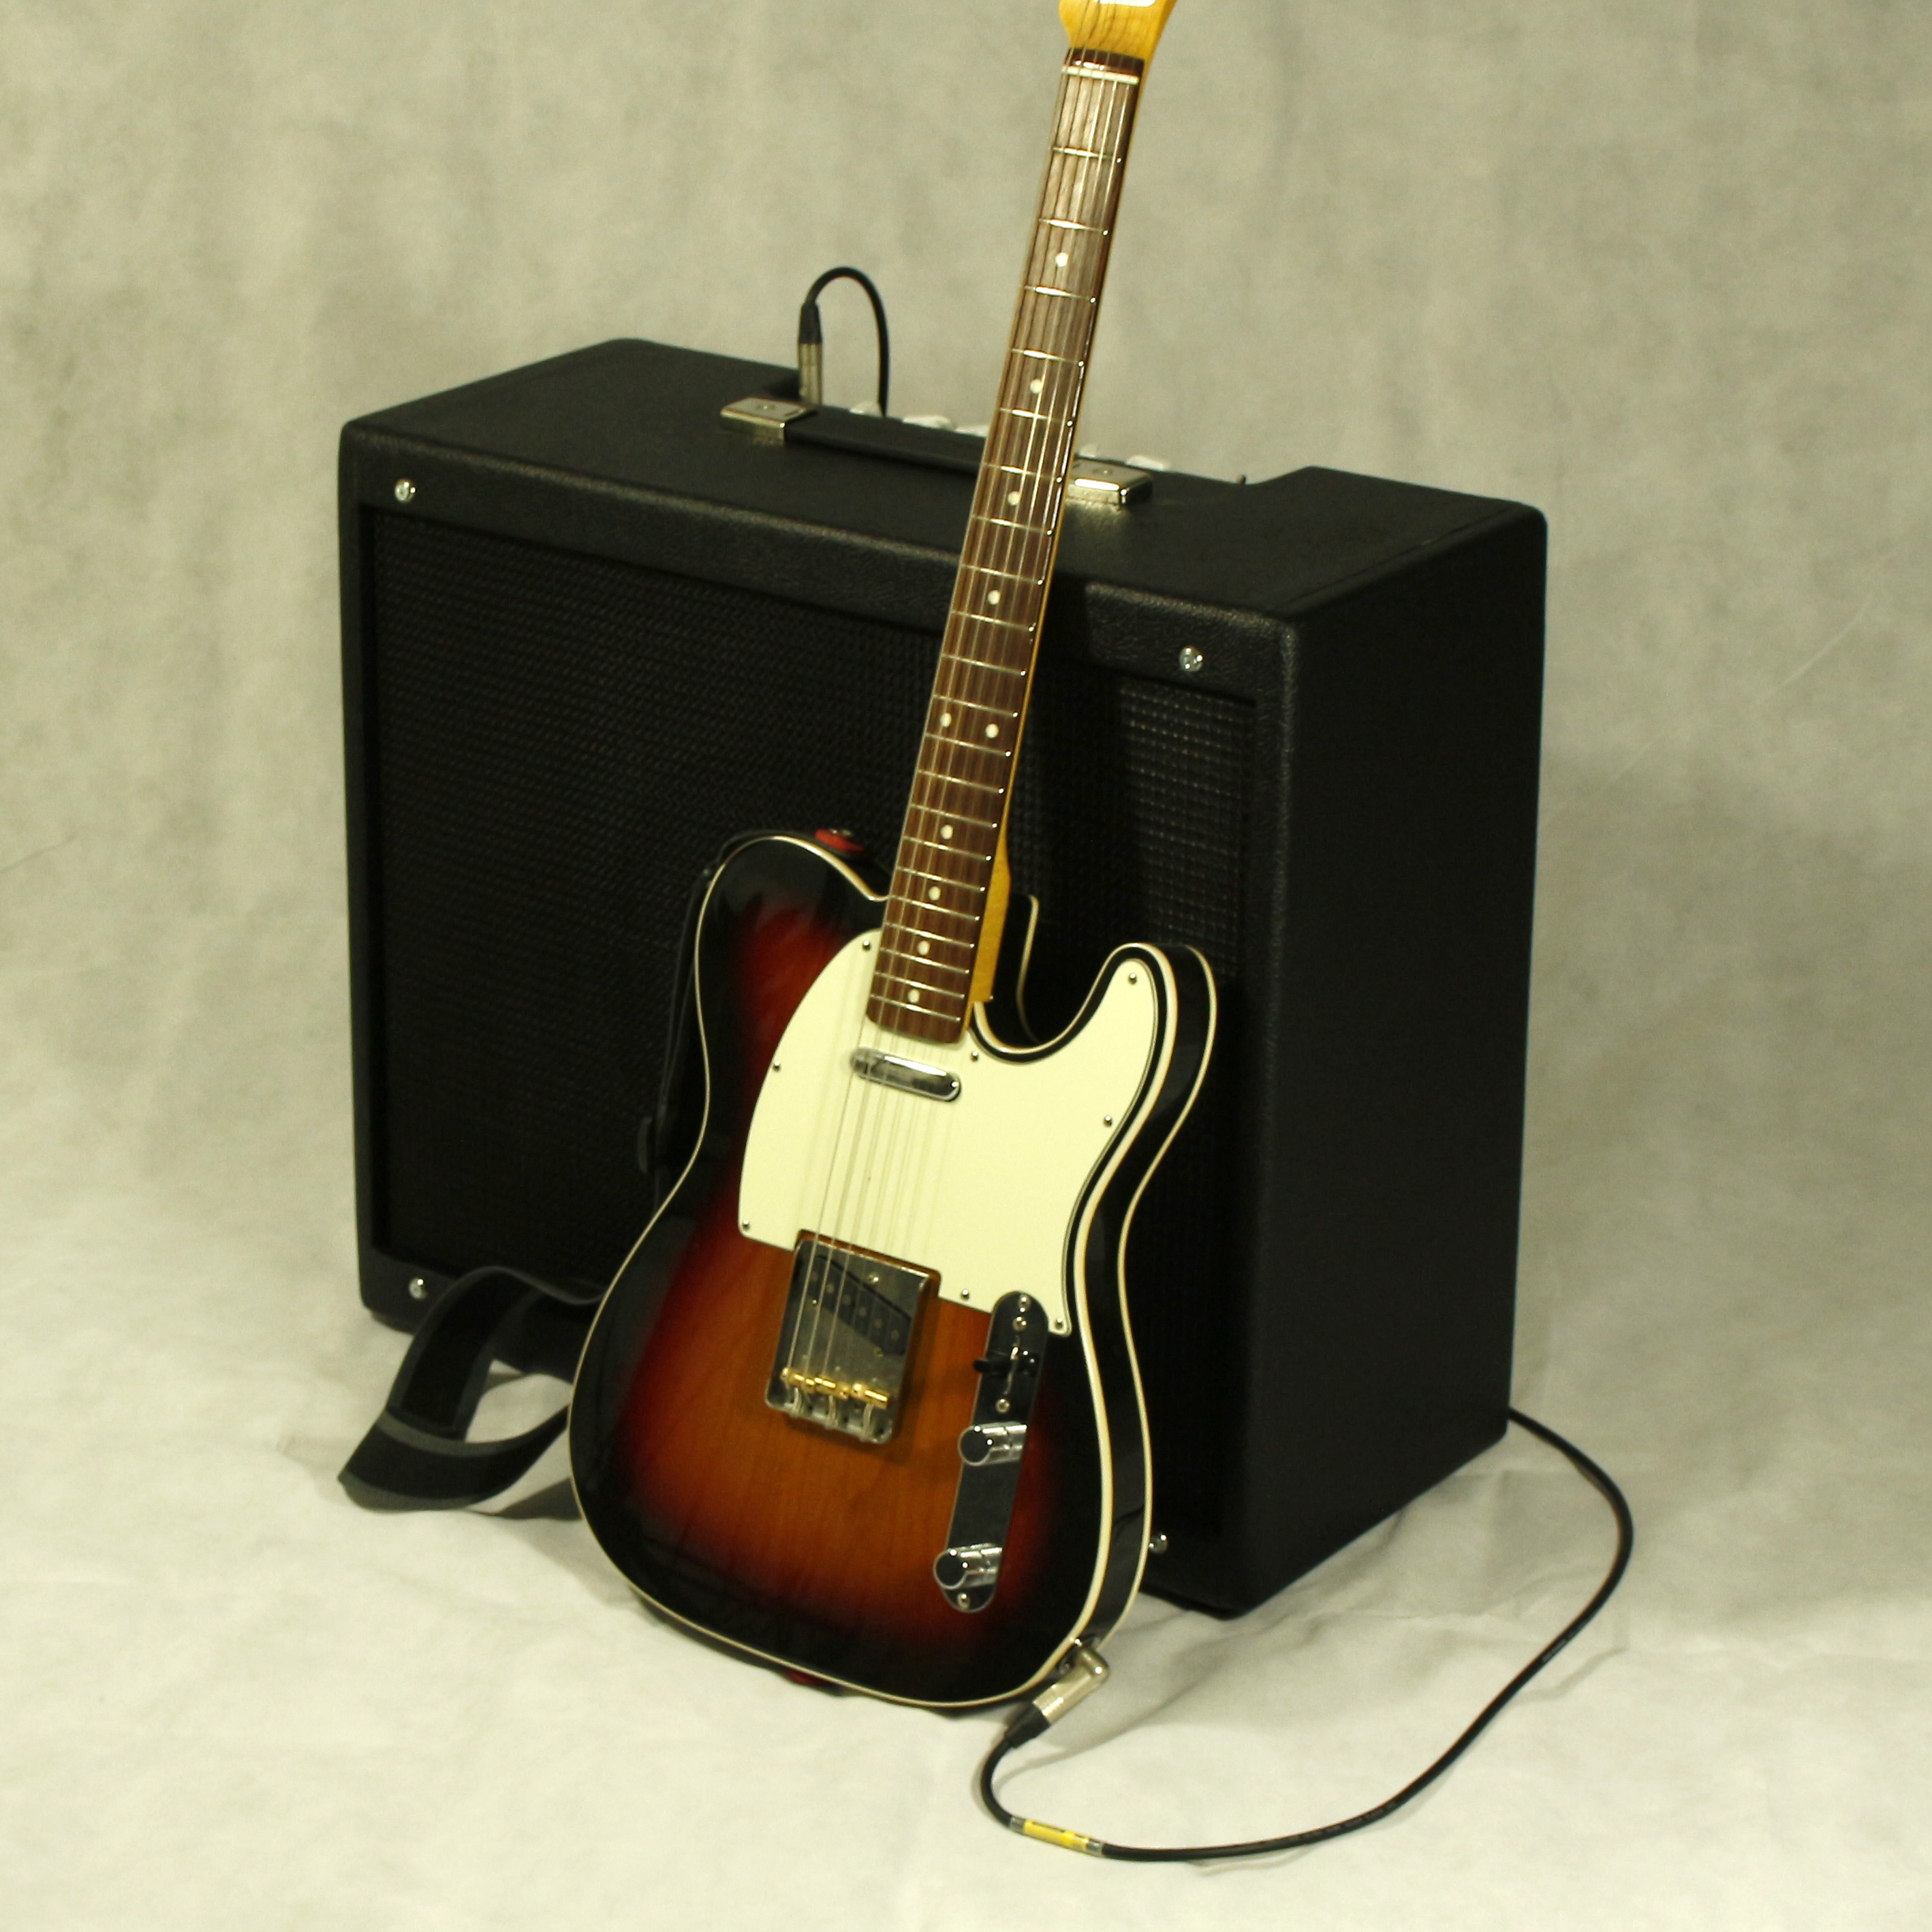 Steward Guitar Combo And Speaker Cabinets Award Session